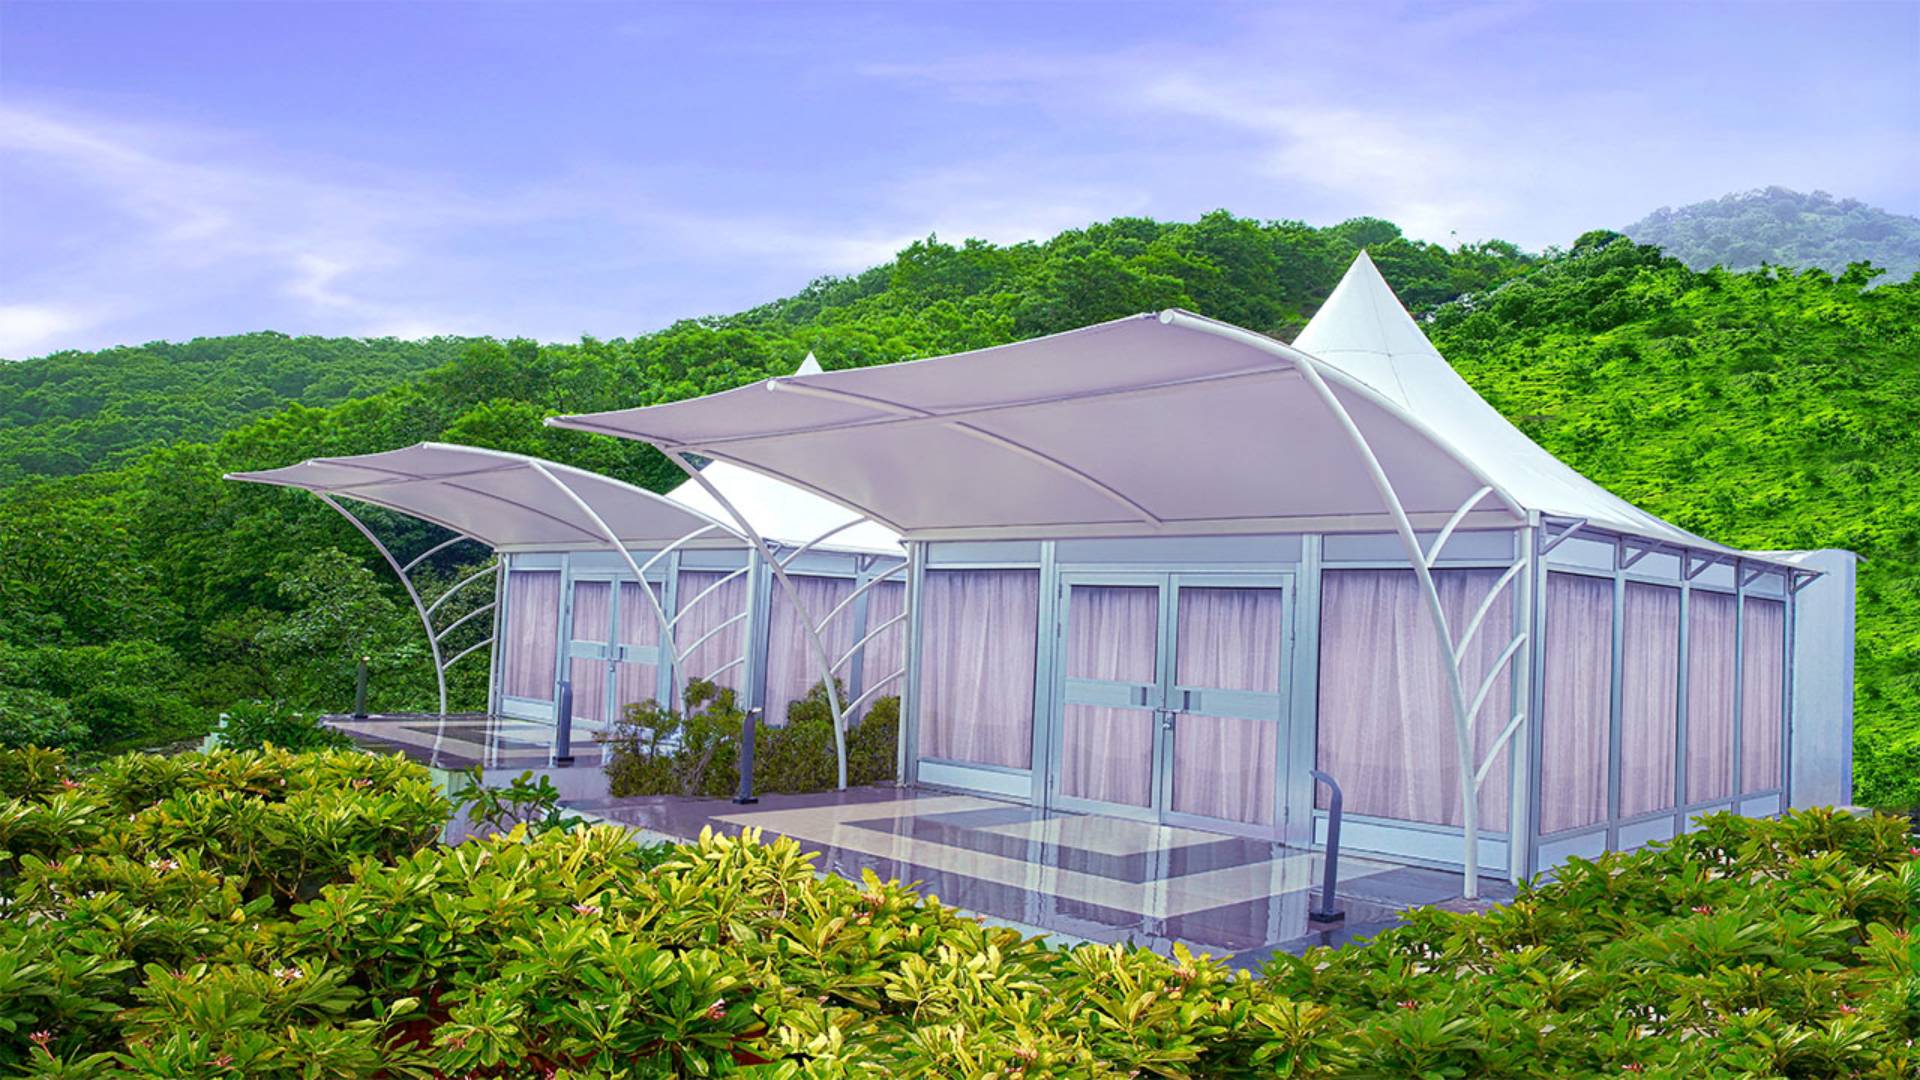 THE TOPAZ AC LUXURIOUS GLASS TENTS at Sunny's World Pune (6)